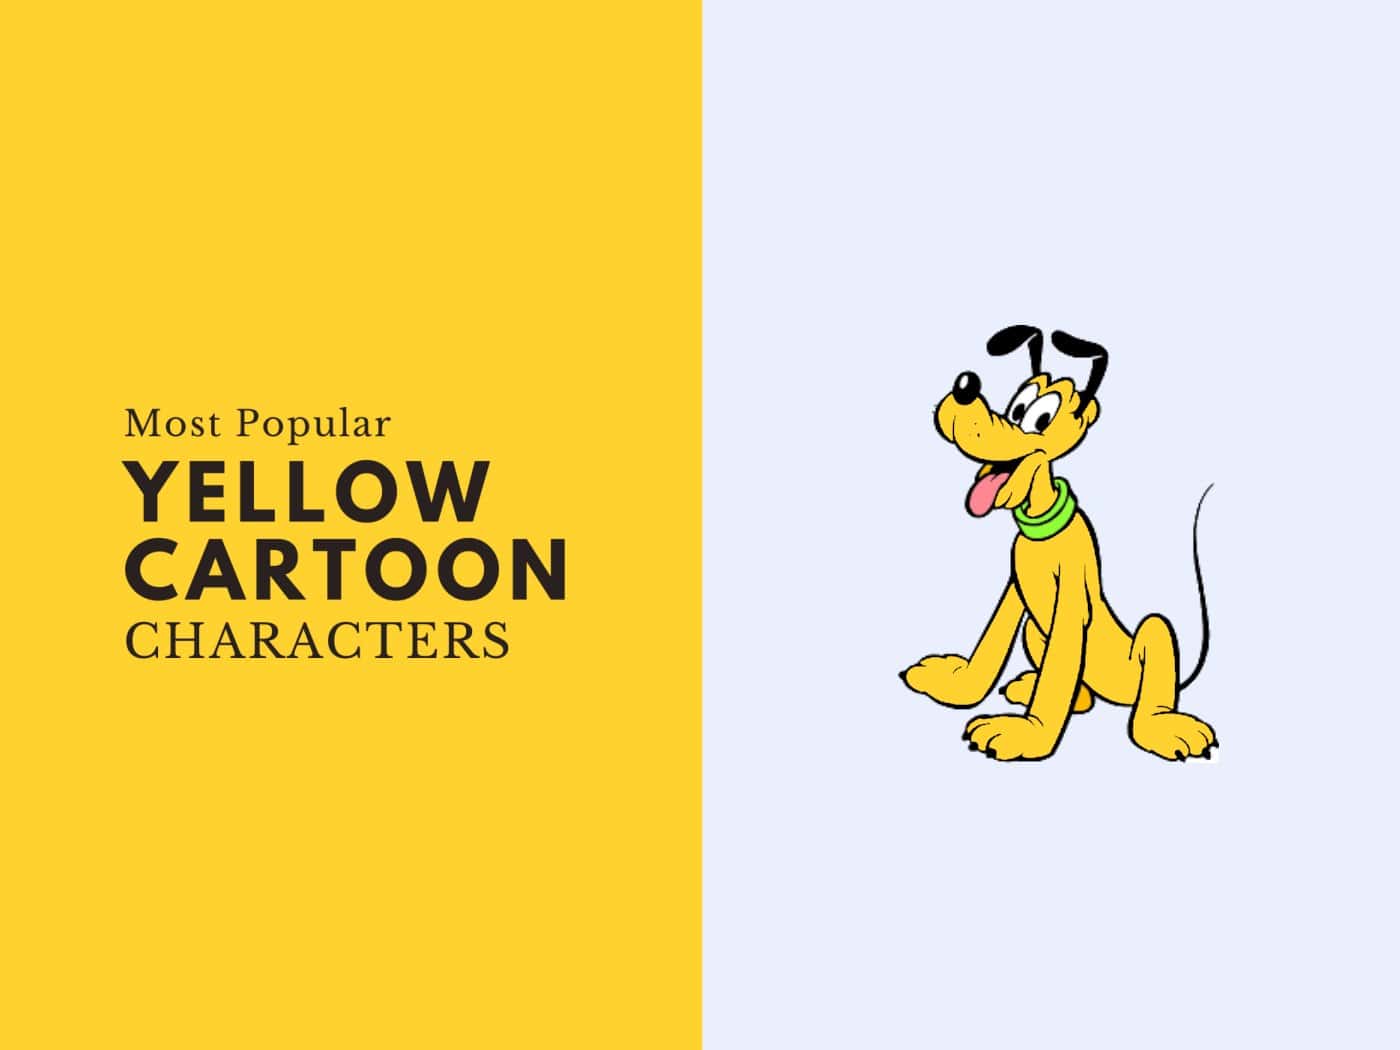 13 Most Popular Yellow Cartoon Characters of All Time